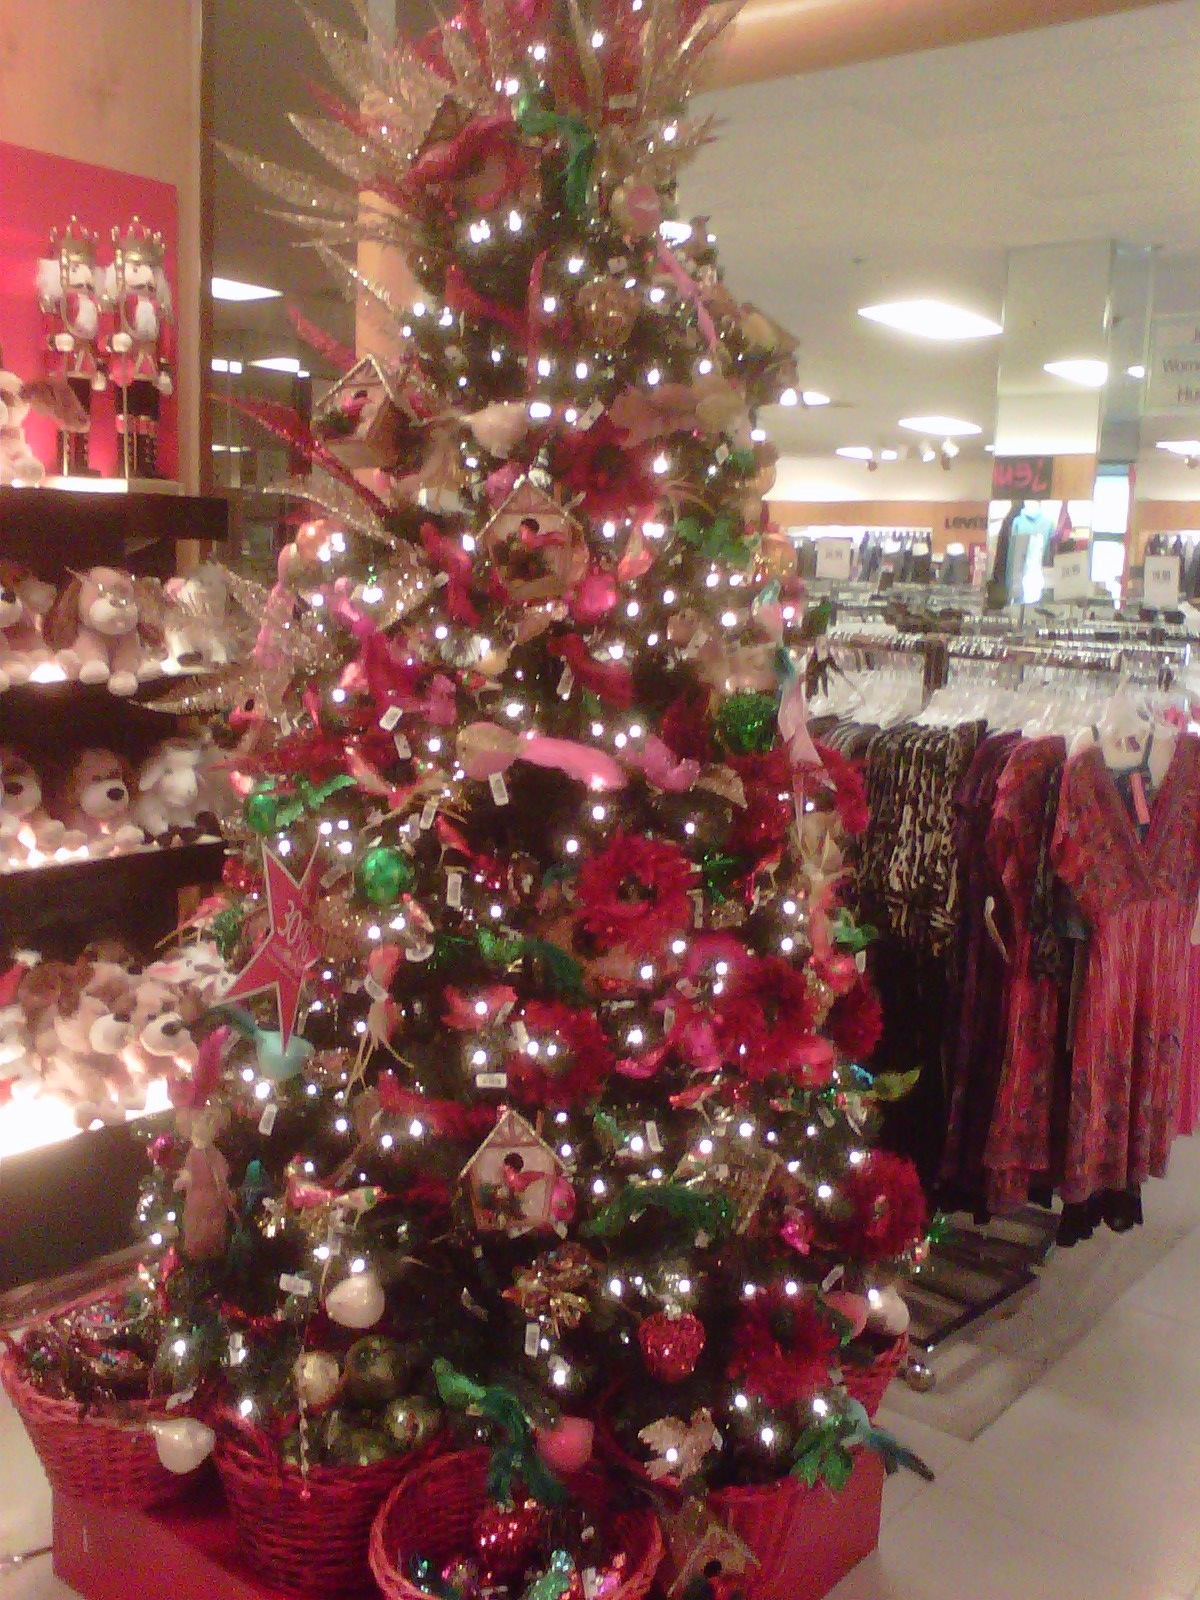 Macy’s – The First Store I Saw That Put Up Holiday Decorations